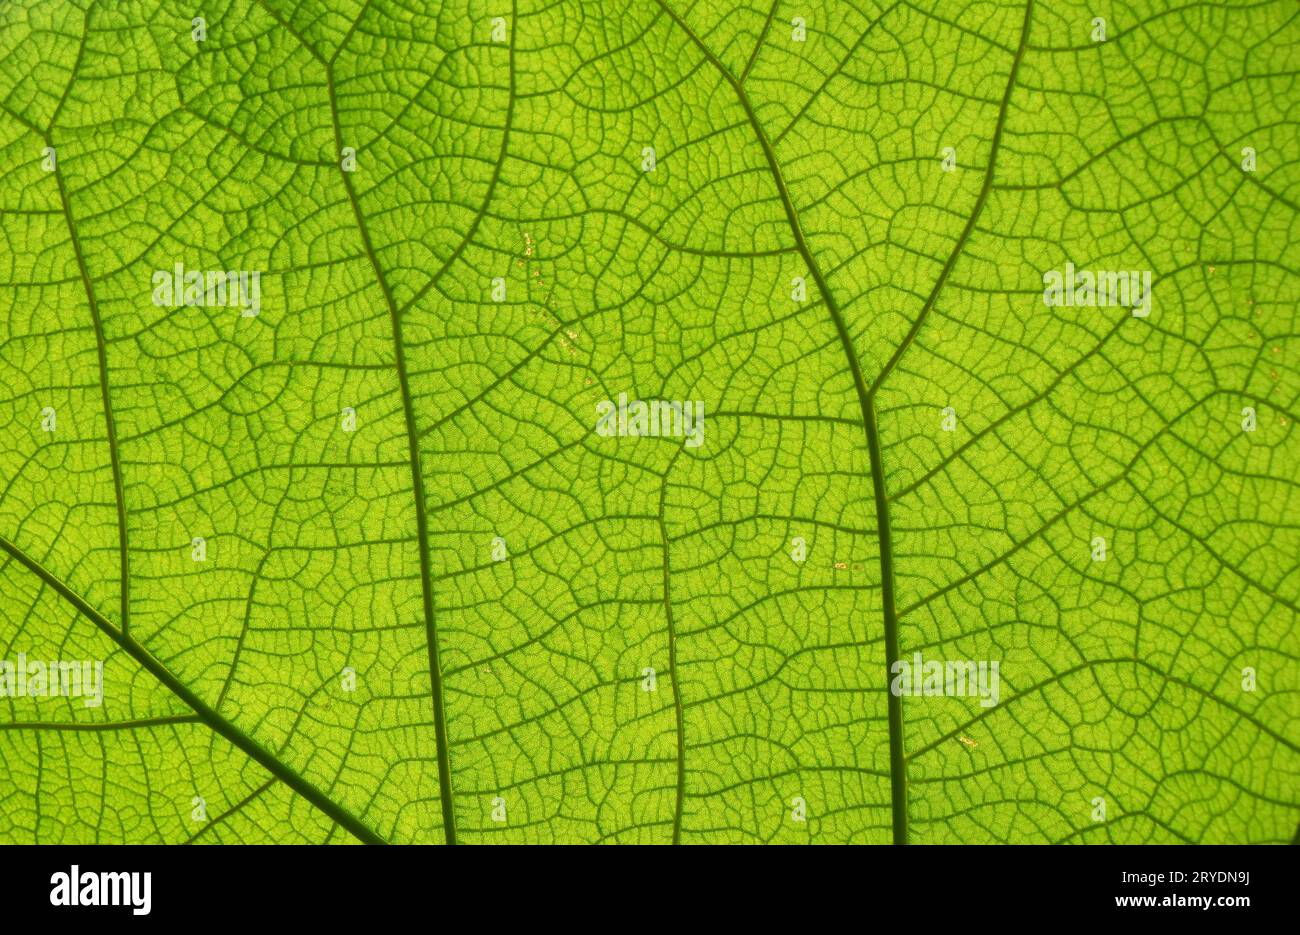 Extreme close up texture of green leaf veins Stock Photo